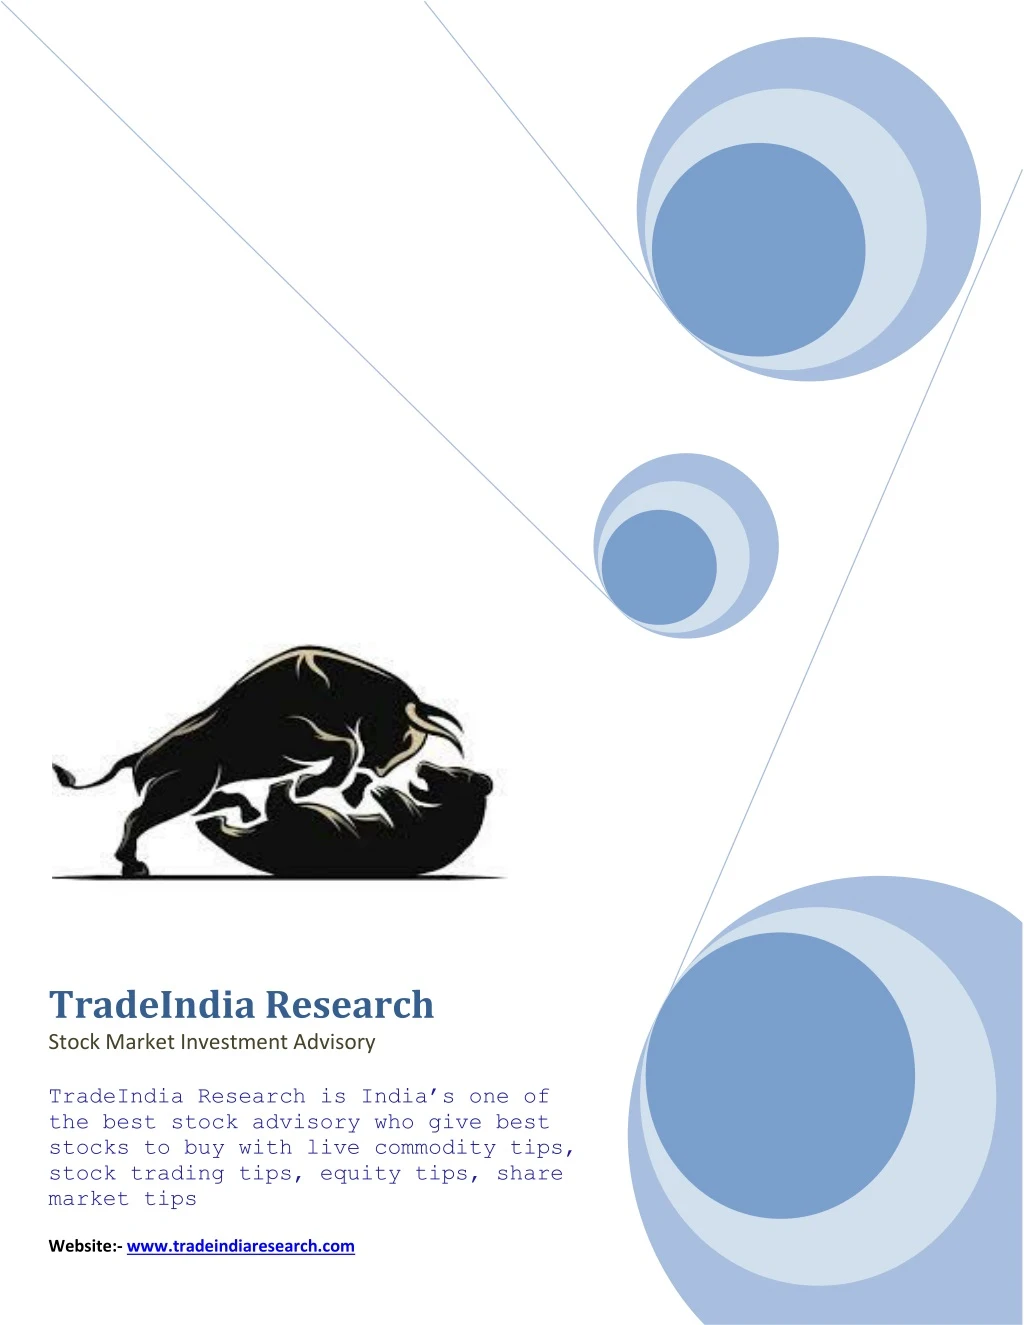 tradeindia research stock market investment